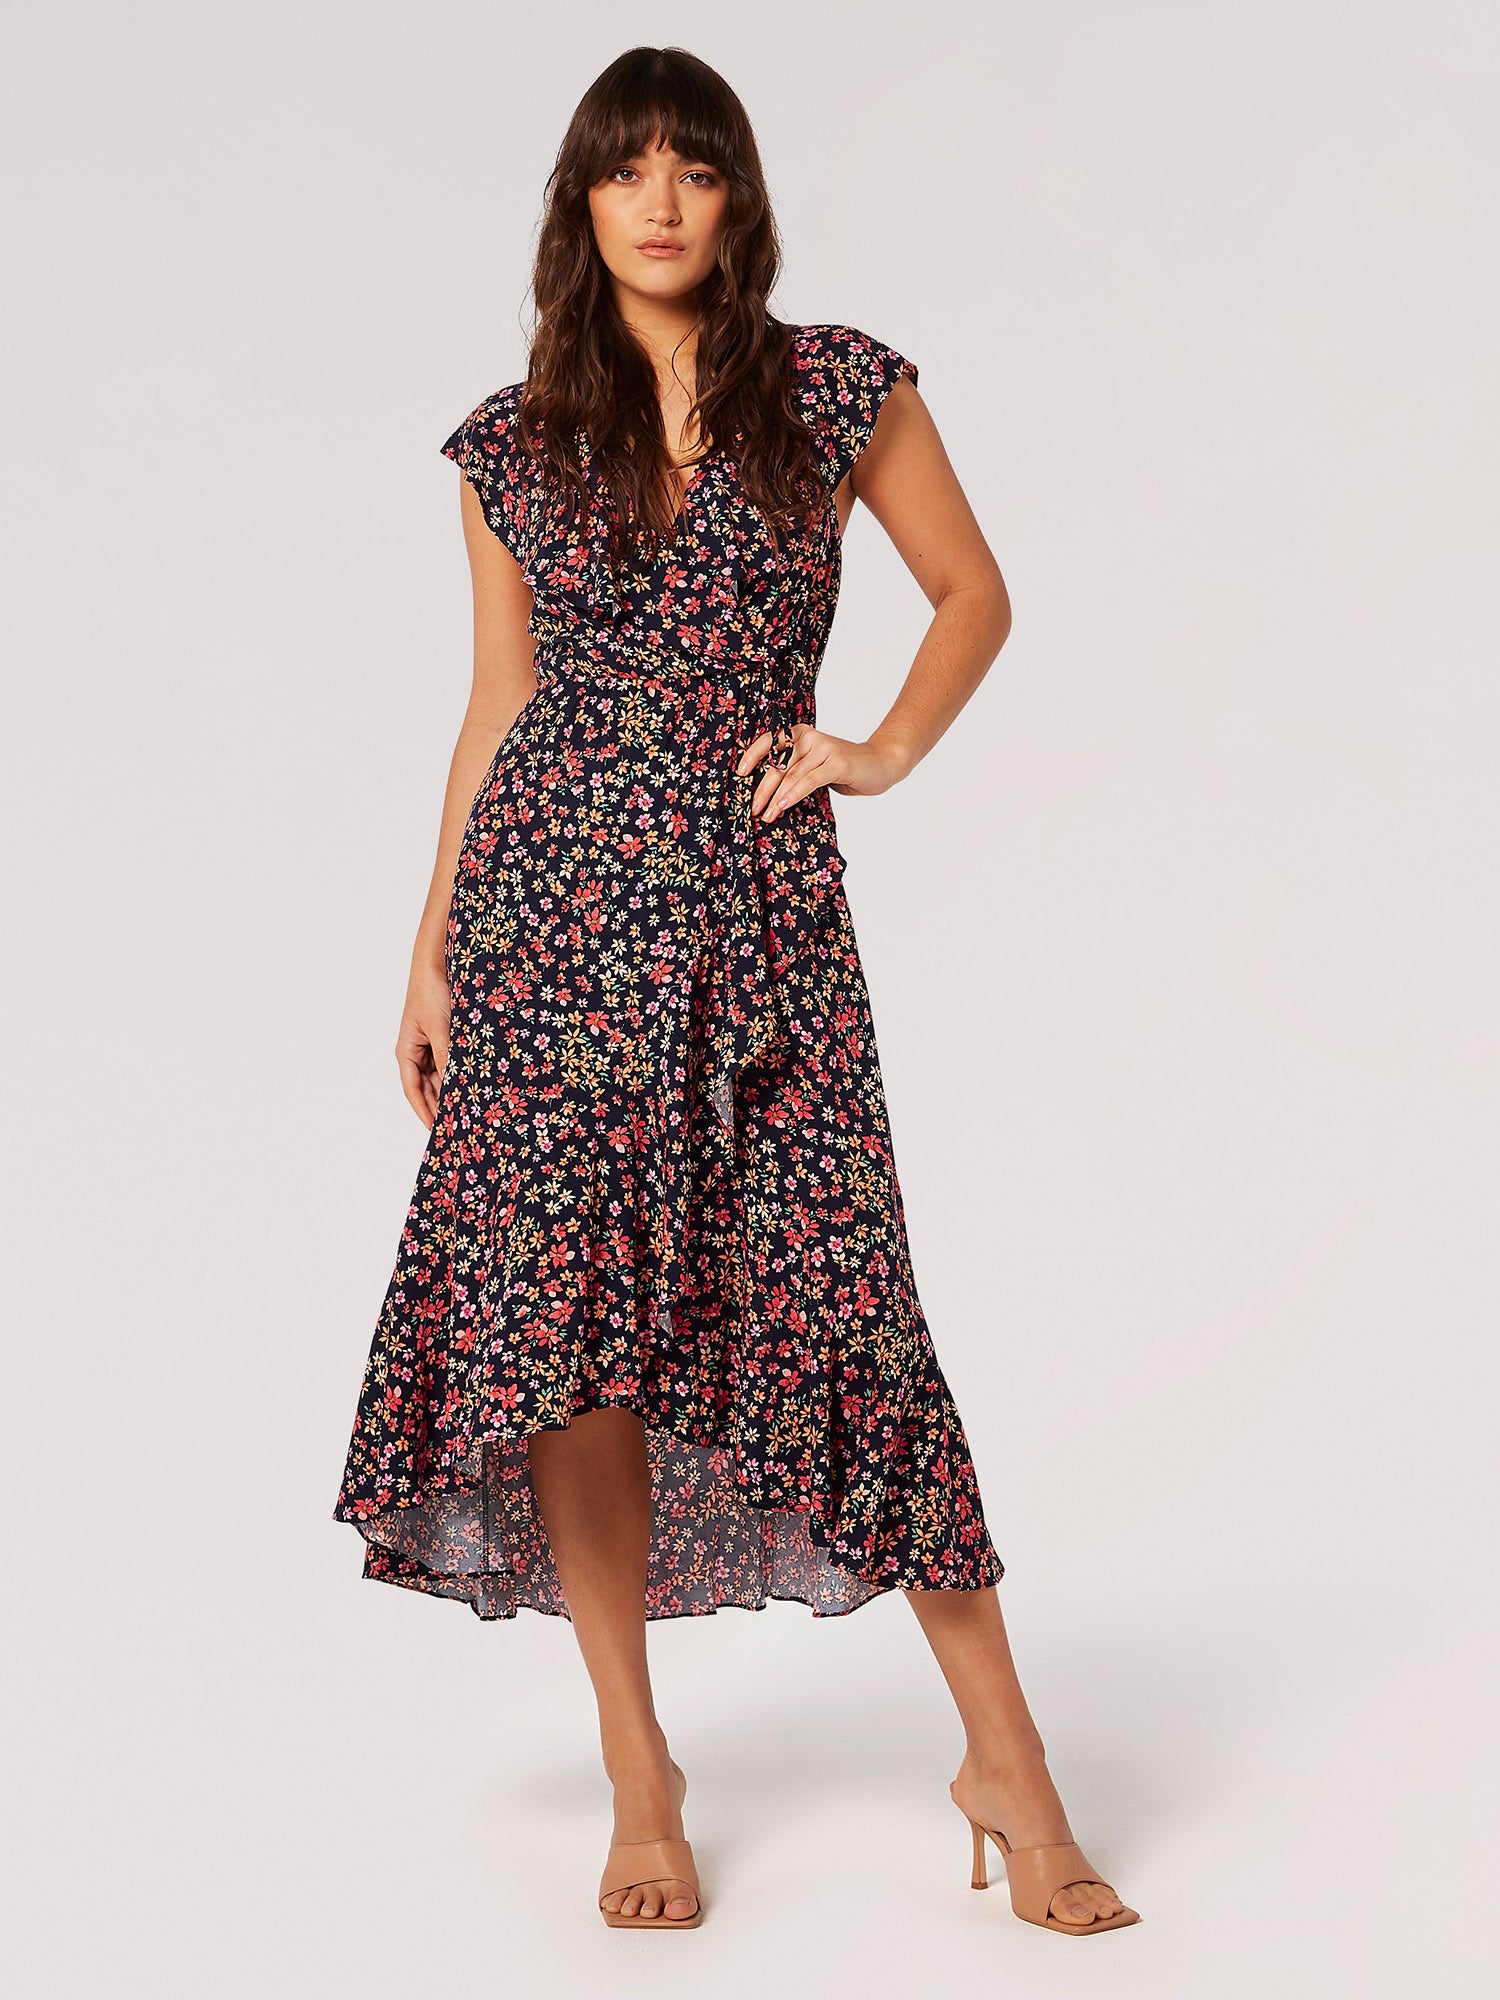 This floral-printed midi is the perfect pick for special occasions. Lightweight and woven, it features a flattering wrap design with a plunging V-neckline, an elastic waist with a tie for a comfortable yet defining fit, and a skirt that cascades in ruffles. It's finished with a high-low hem to create a sense of movement. Pair with heeled sandals for a polished finish.